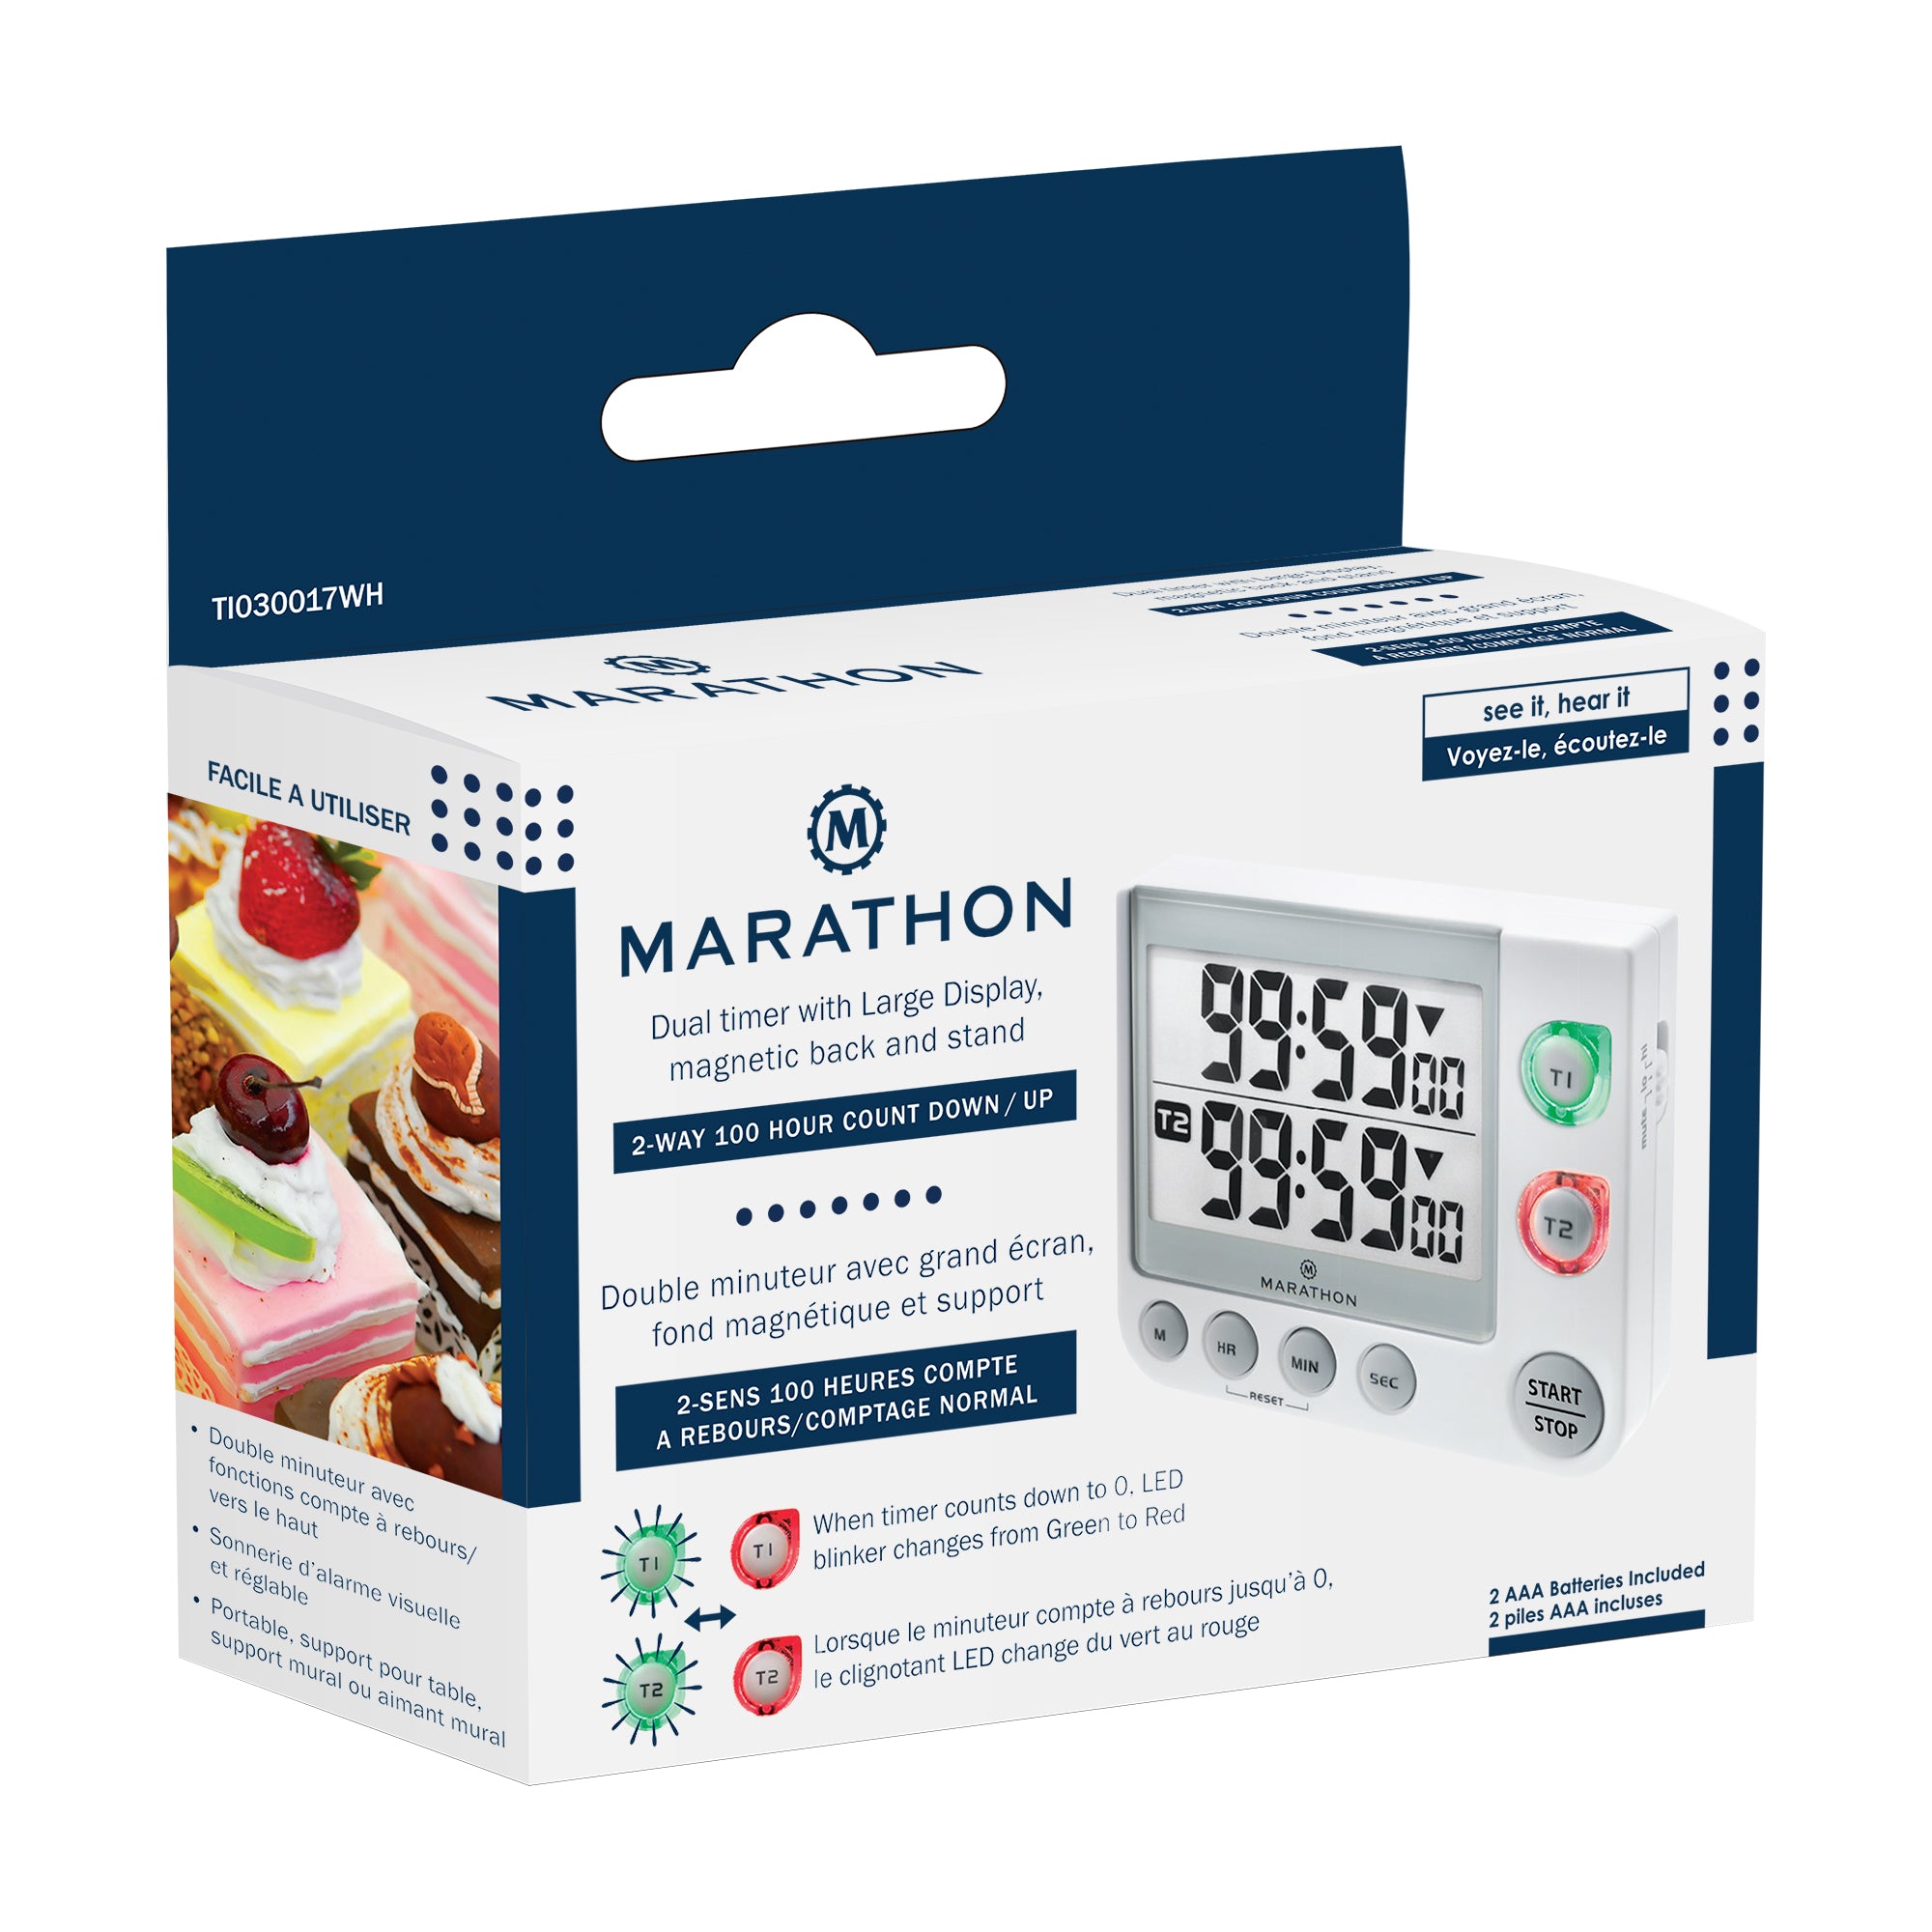 Marathon's Dual Timer with Large Display, Magnetic Back and Stand –  Marathon Watch